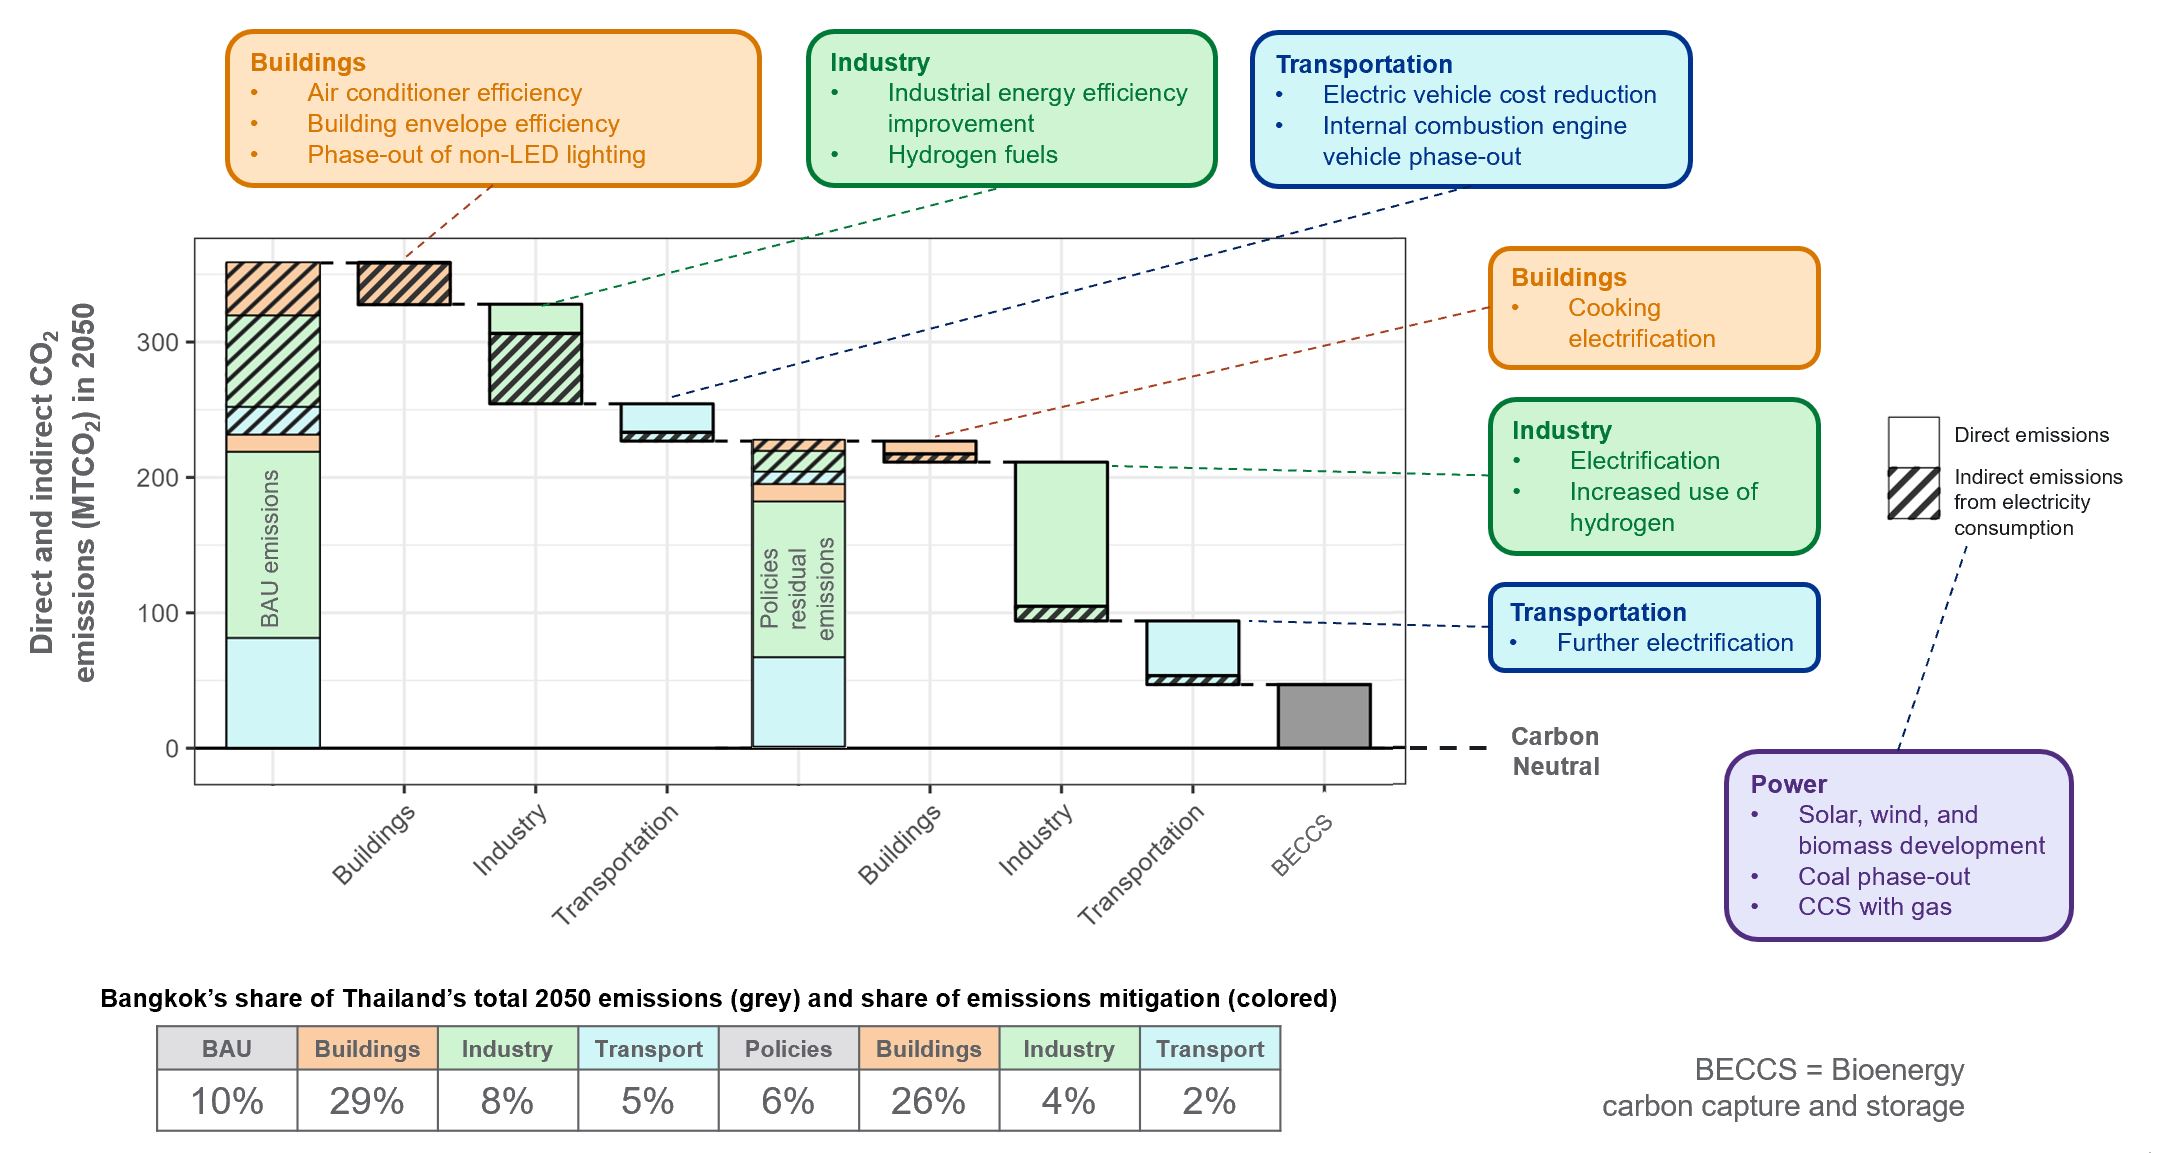 Pathways to Carbon-Neutrality in 2050